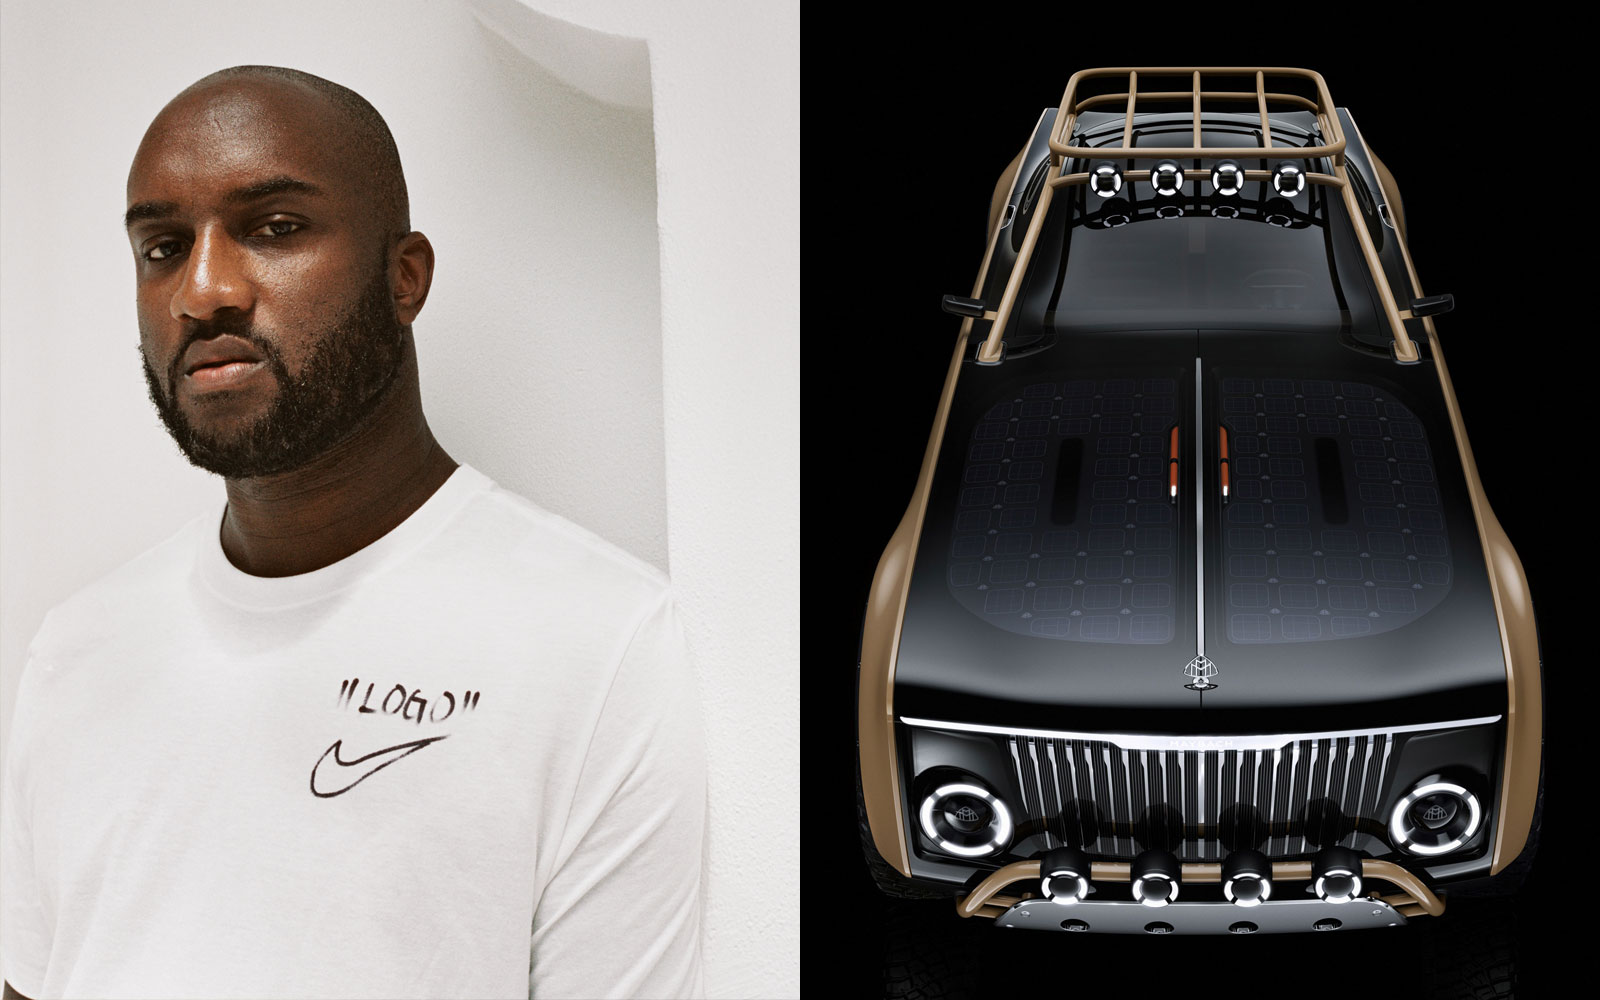 Mercedes-Benz Announces Project MAYBACH with Virgil Abloh in Honor of His Legacy